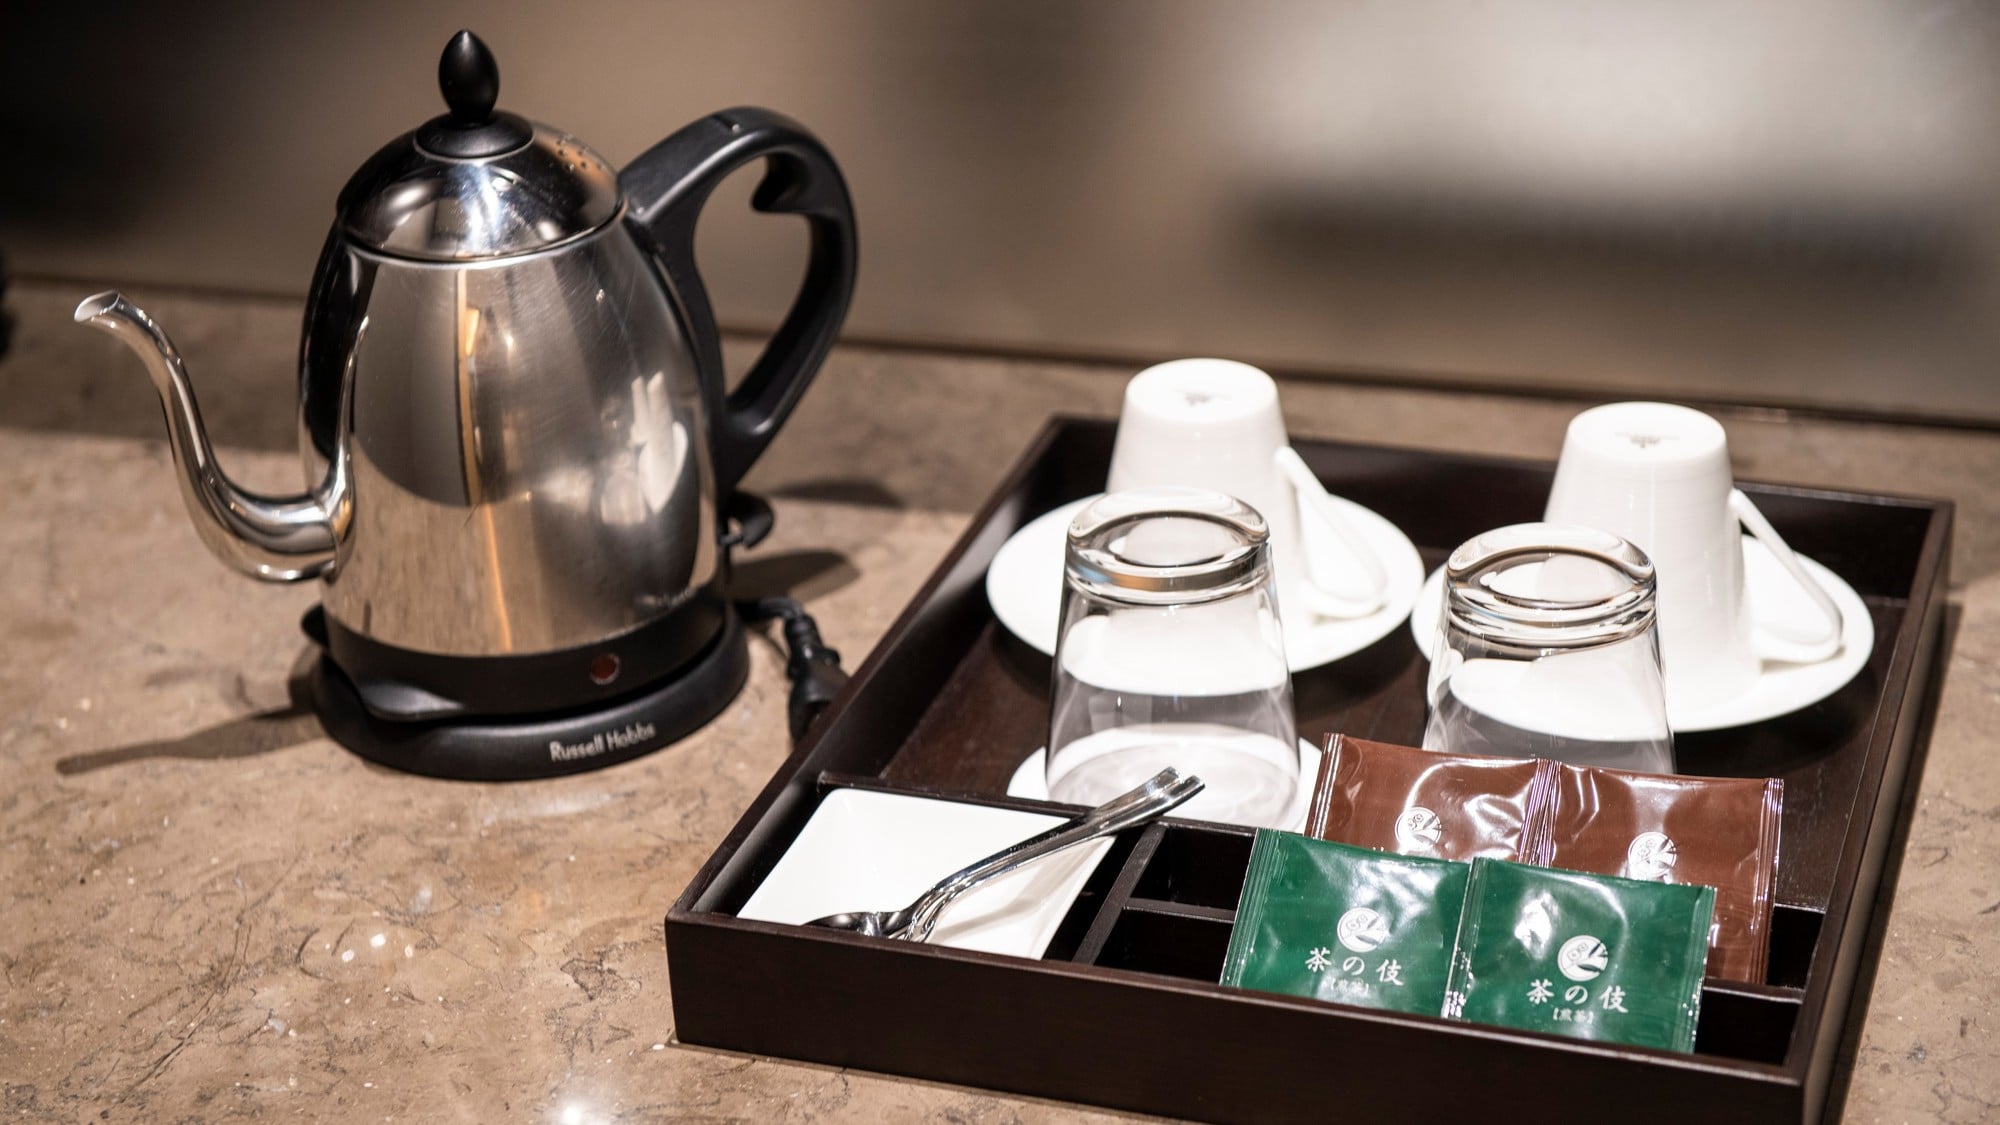 All rooms are equipped with tea set, mineral water and electric kettle.